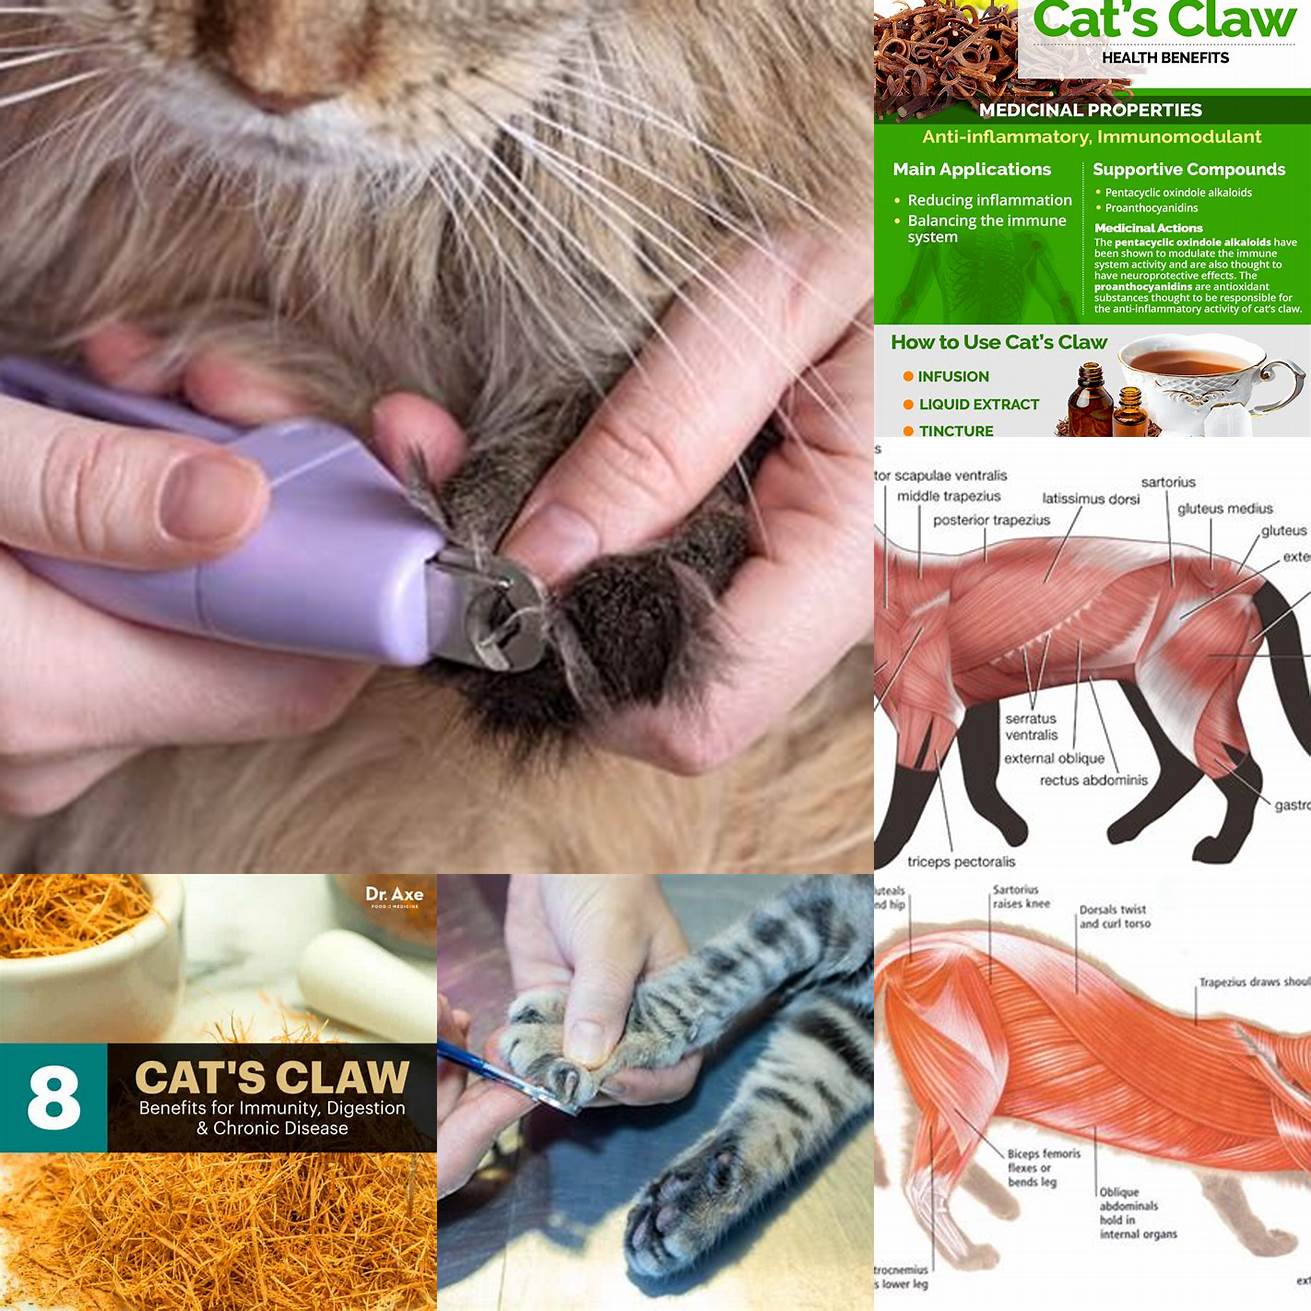 Helps maintain healthy claws and muscles